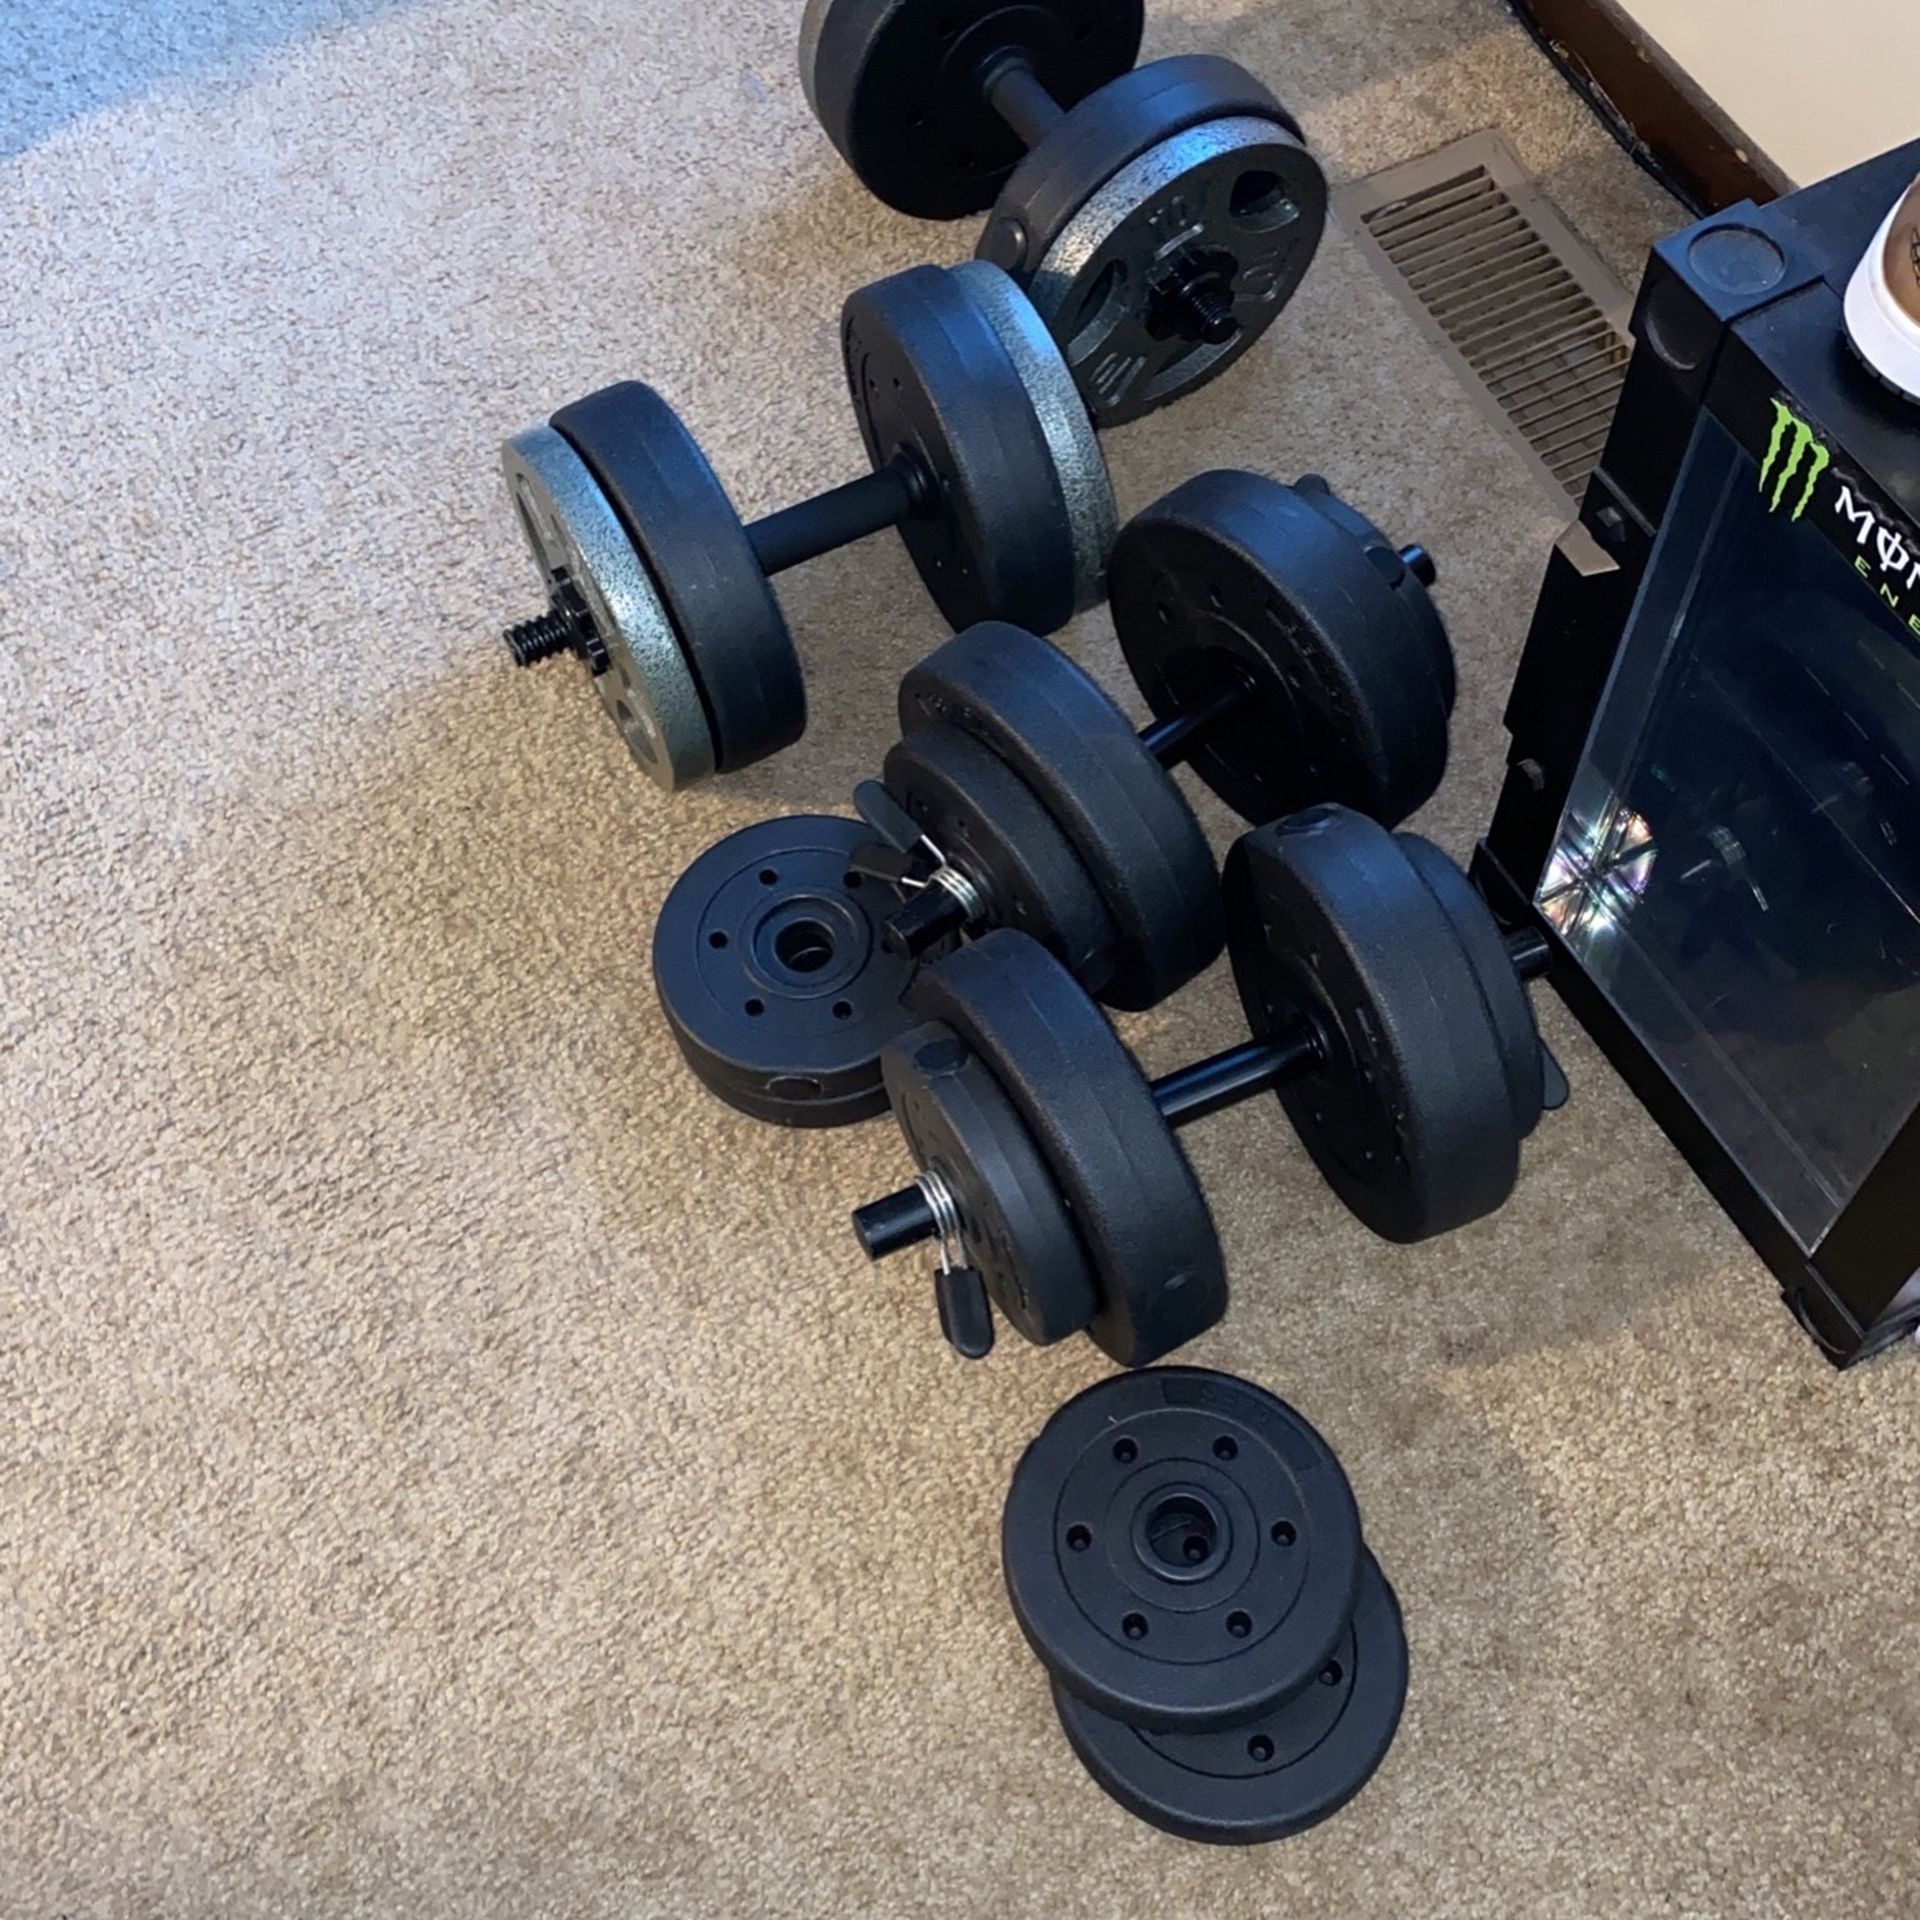 Dumbbell set with Bench